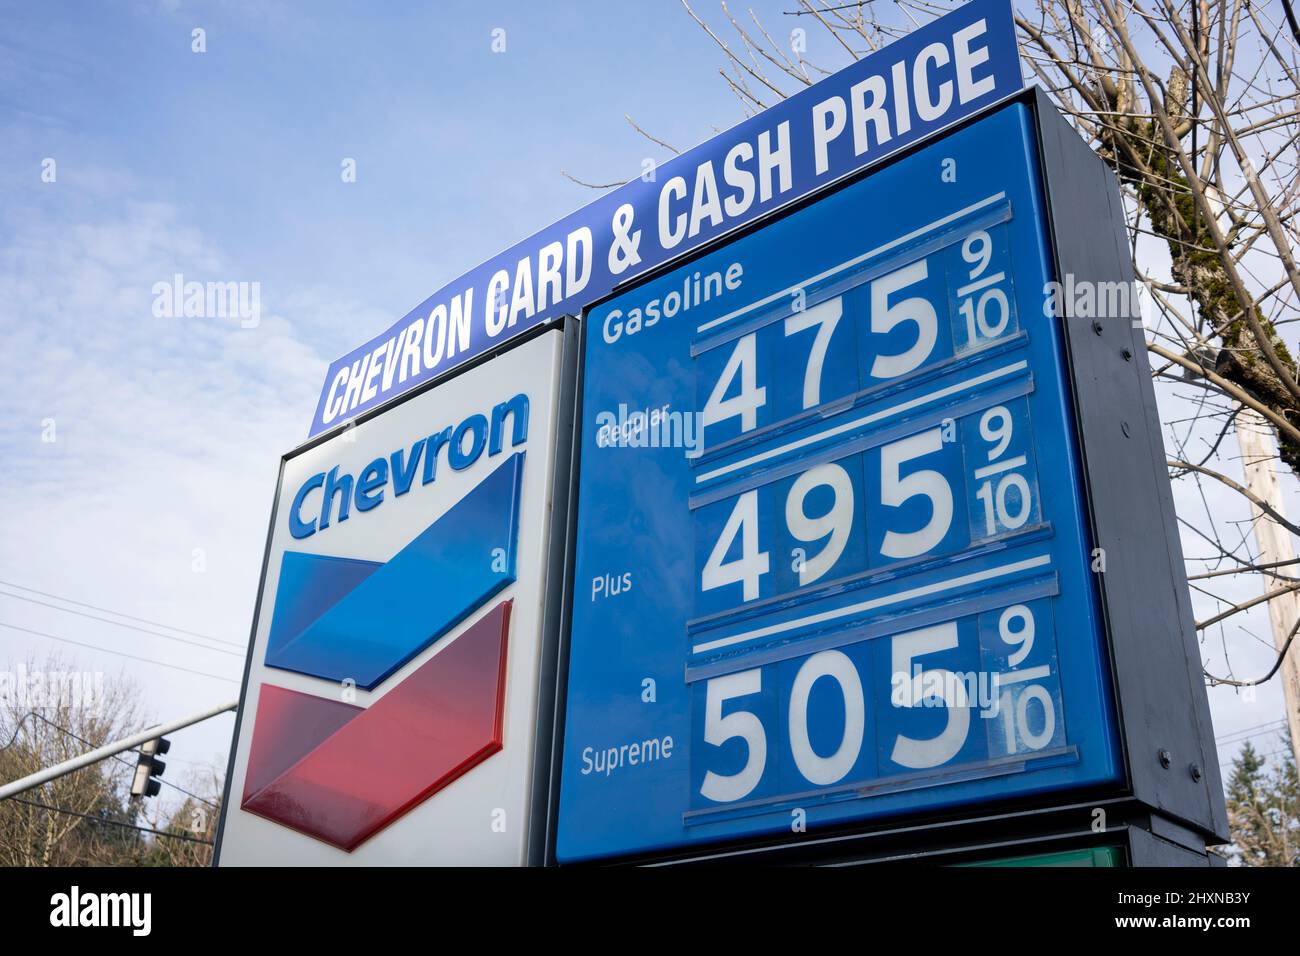 The gas price sign at a Chevron gas station in West Linn, Oregon, seen on March 11, 2022. Oil and gas prices are soaring due to Russia's war in Ukraine. Stock Photo